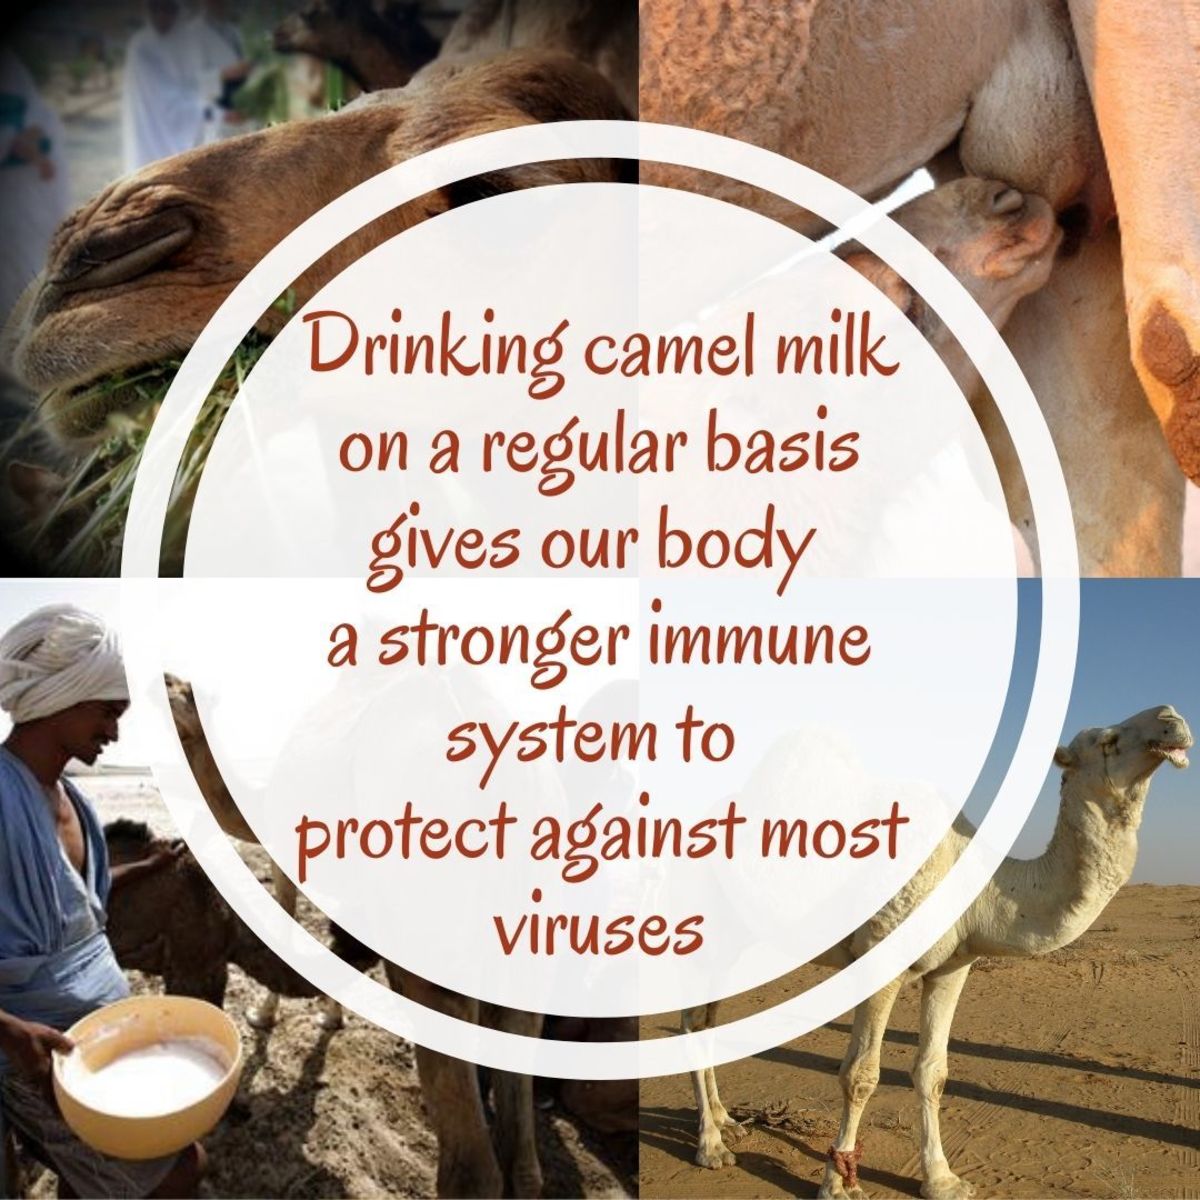 Drinking camel milk on a regular basis gives our body a stronger immune system to protect against most viruses